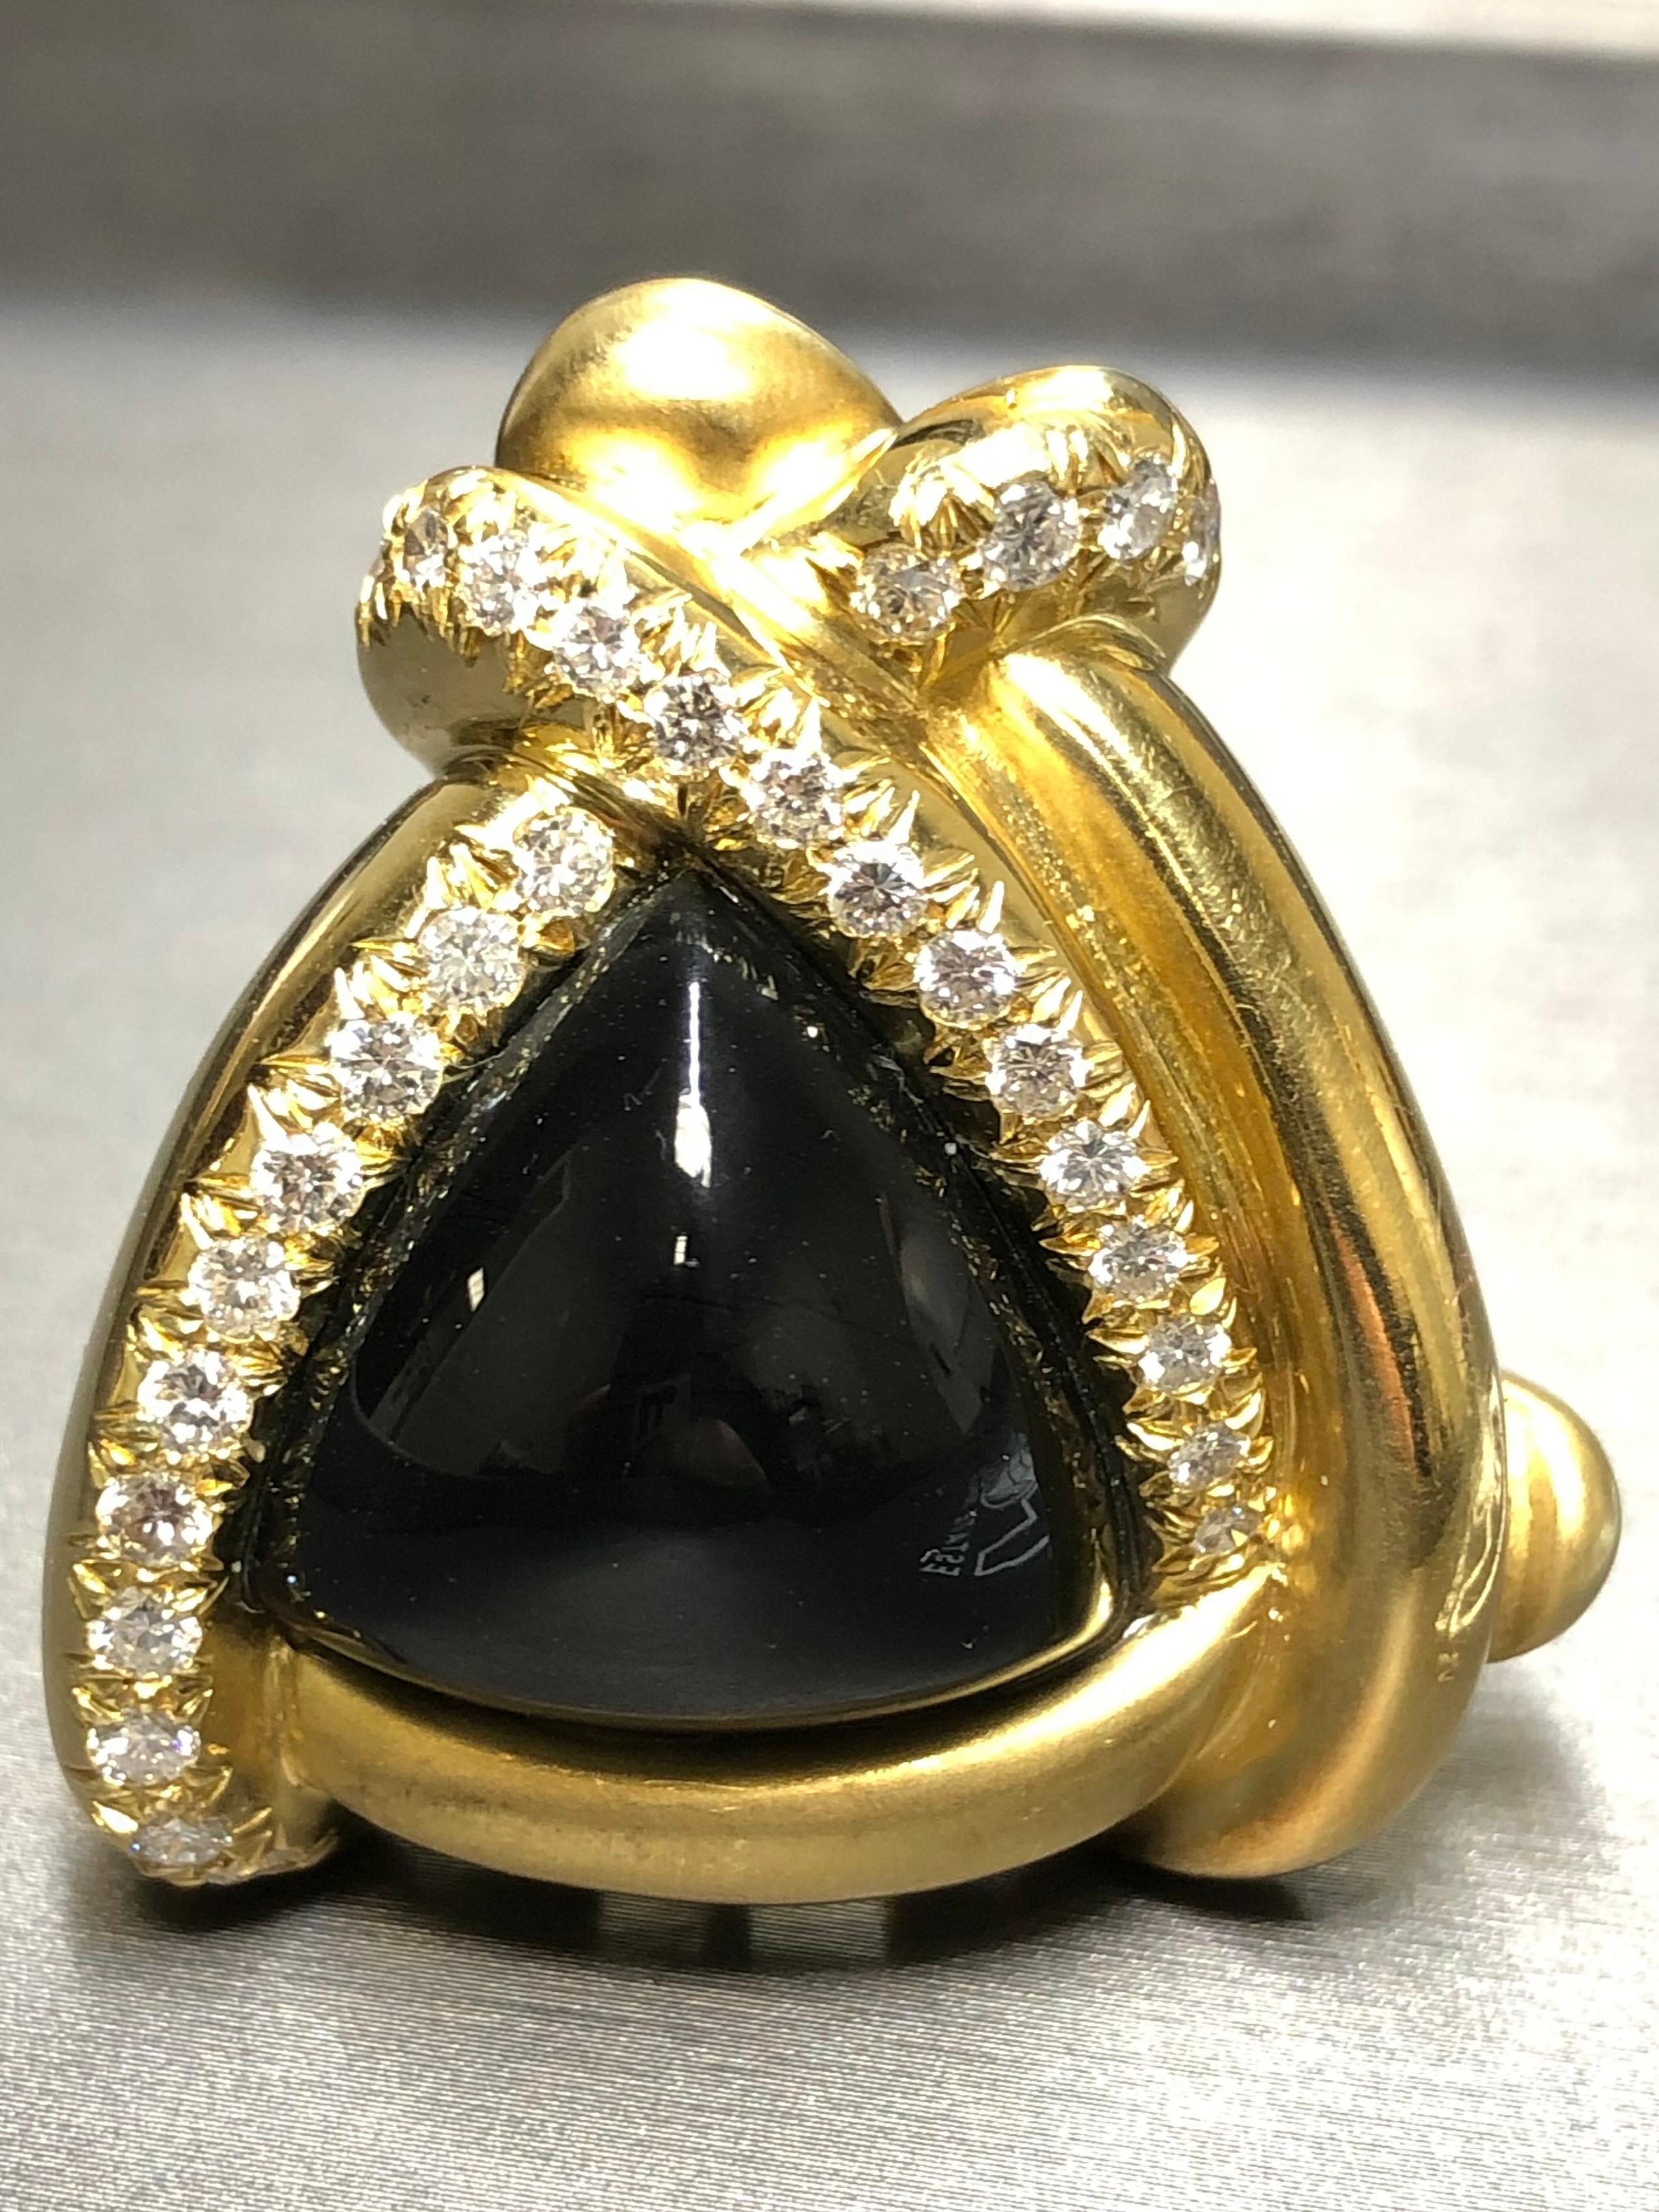 Estate MARLENE STOWE Satin Finish 18K Cabochon Onyx Diamond Brooch Pin G Vs In Good Condition For Sale In Winter Springs, FL